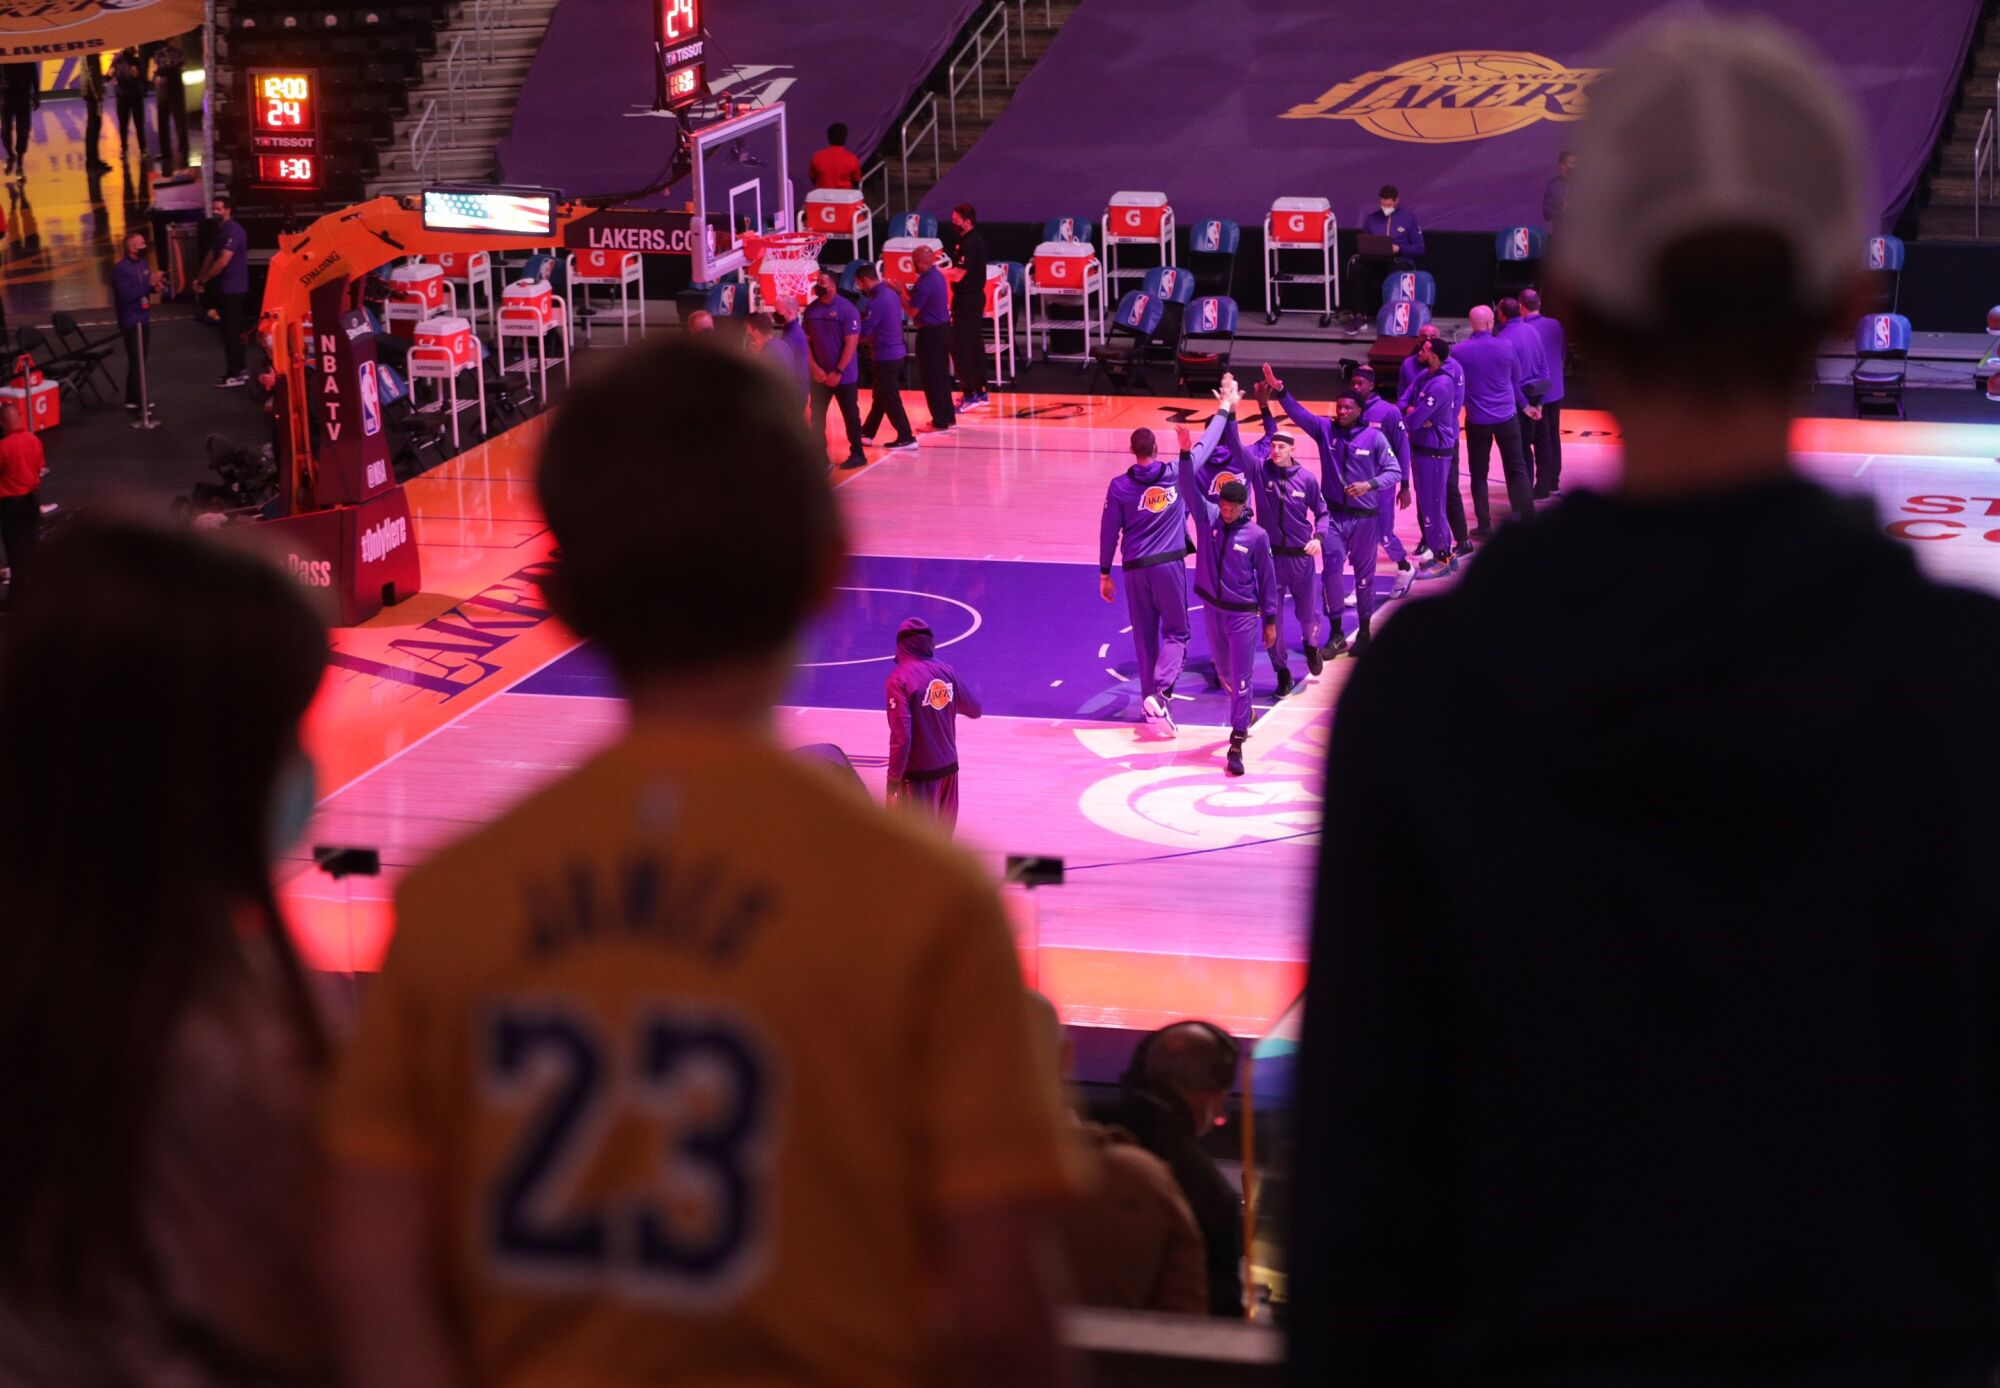 Fans and players stand for the national anthem before the Lakers-Celtics game.